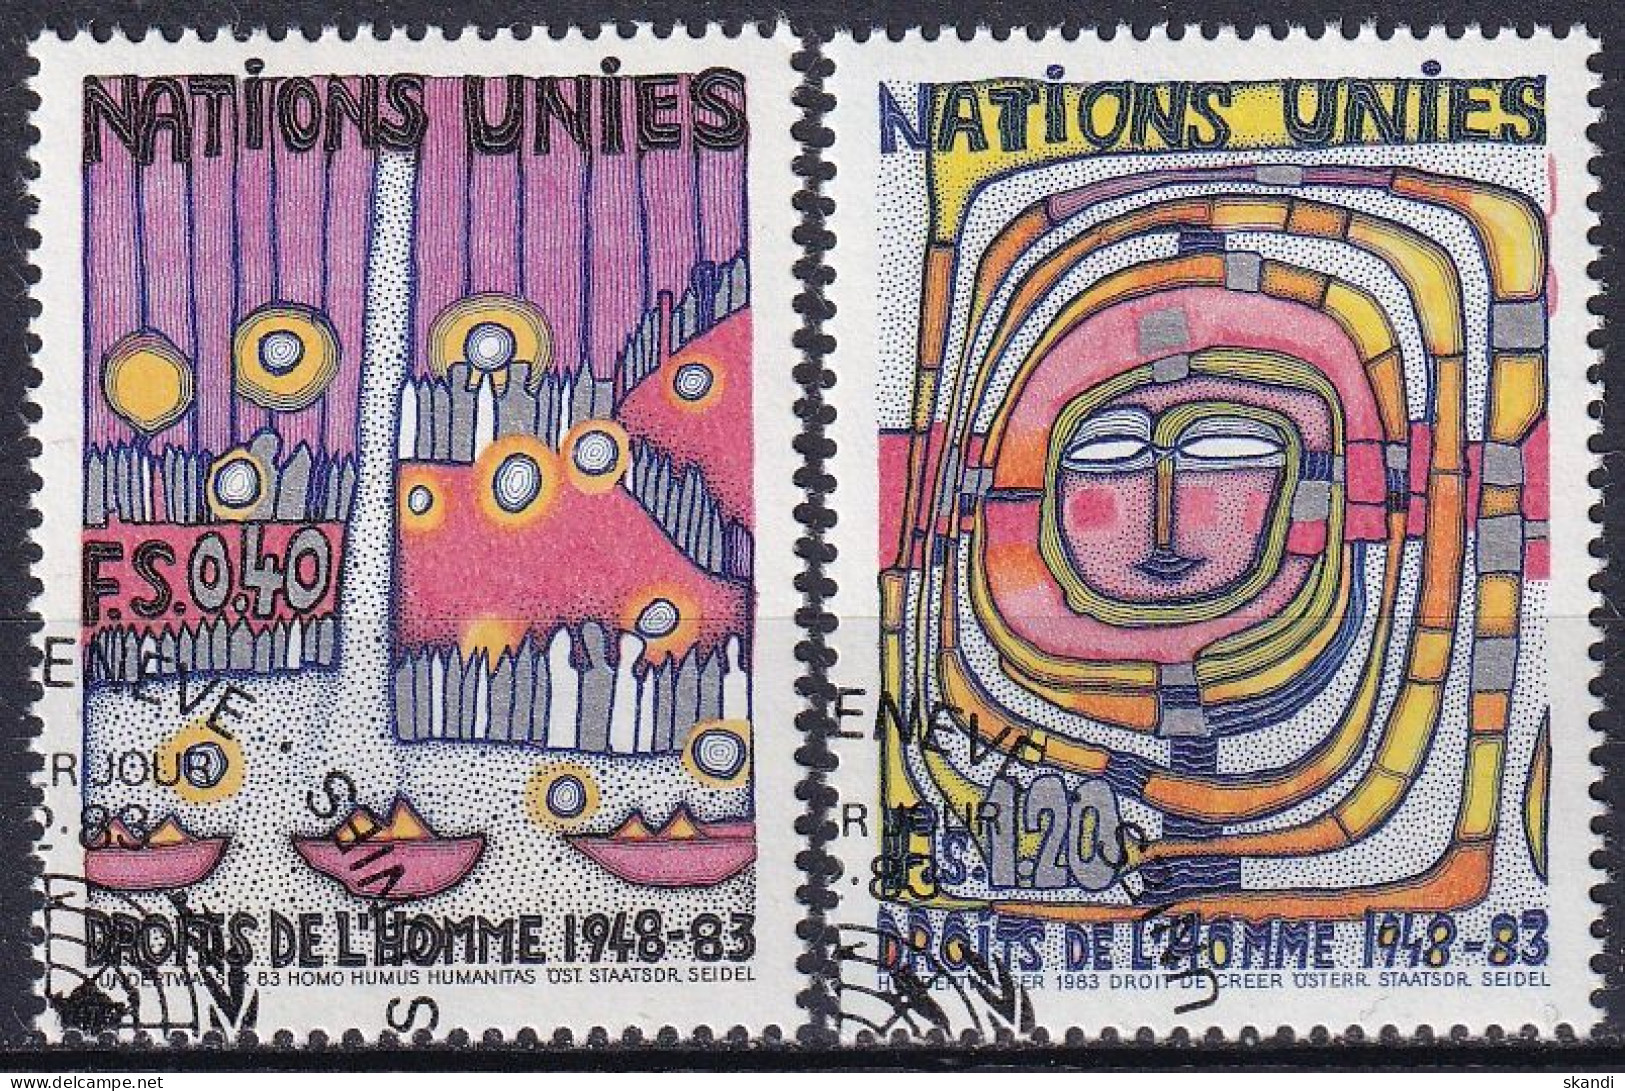 UNO GENF 1983 Mi-Nr. 117/18 O Used - Aus Abo - Used Stamps